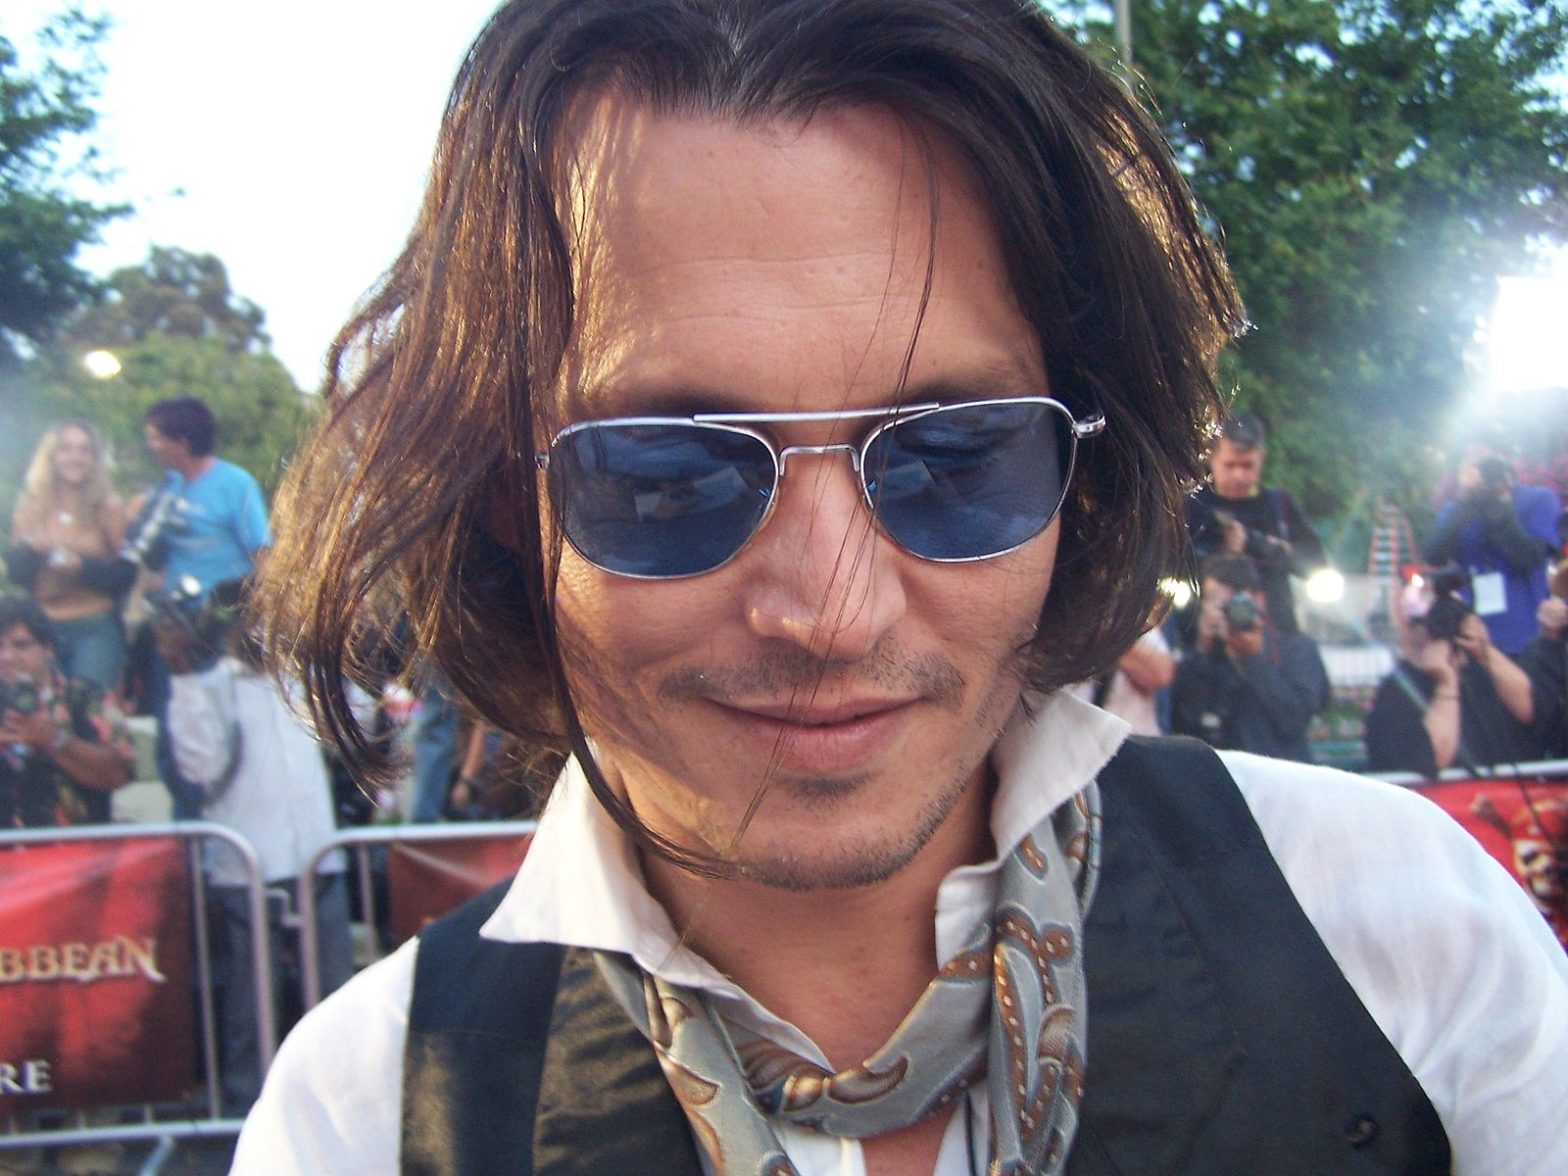 JOHNNY DEPP TIMELINE – FROM BLOW TO BREAKUP